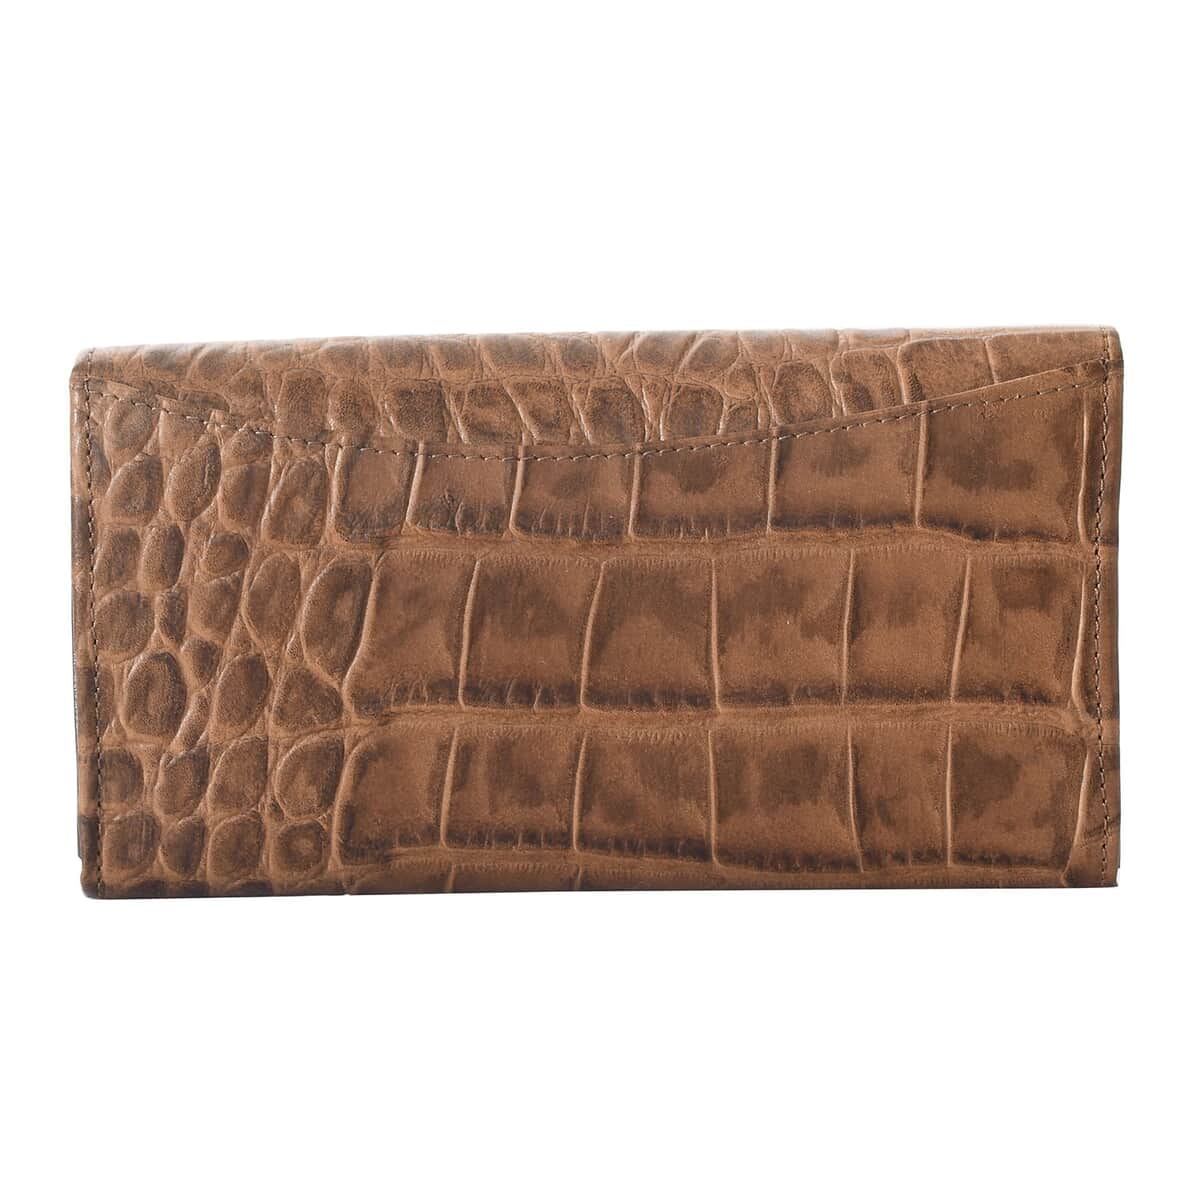 "UNION CODE -RFID Protected 100% Genuine Leather Women's Wallet SIZE: 7.5(L)x4.5(W) inches COLOR:DarkBrown" image number 5